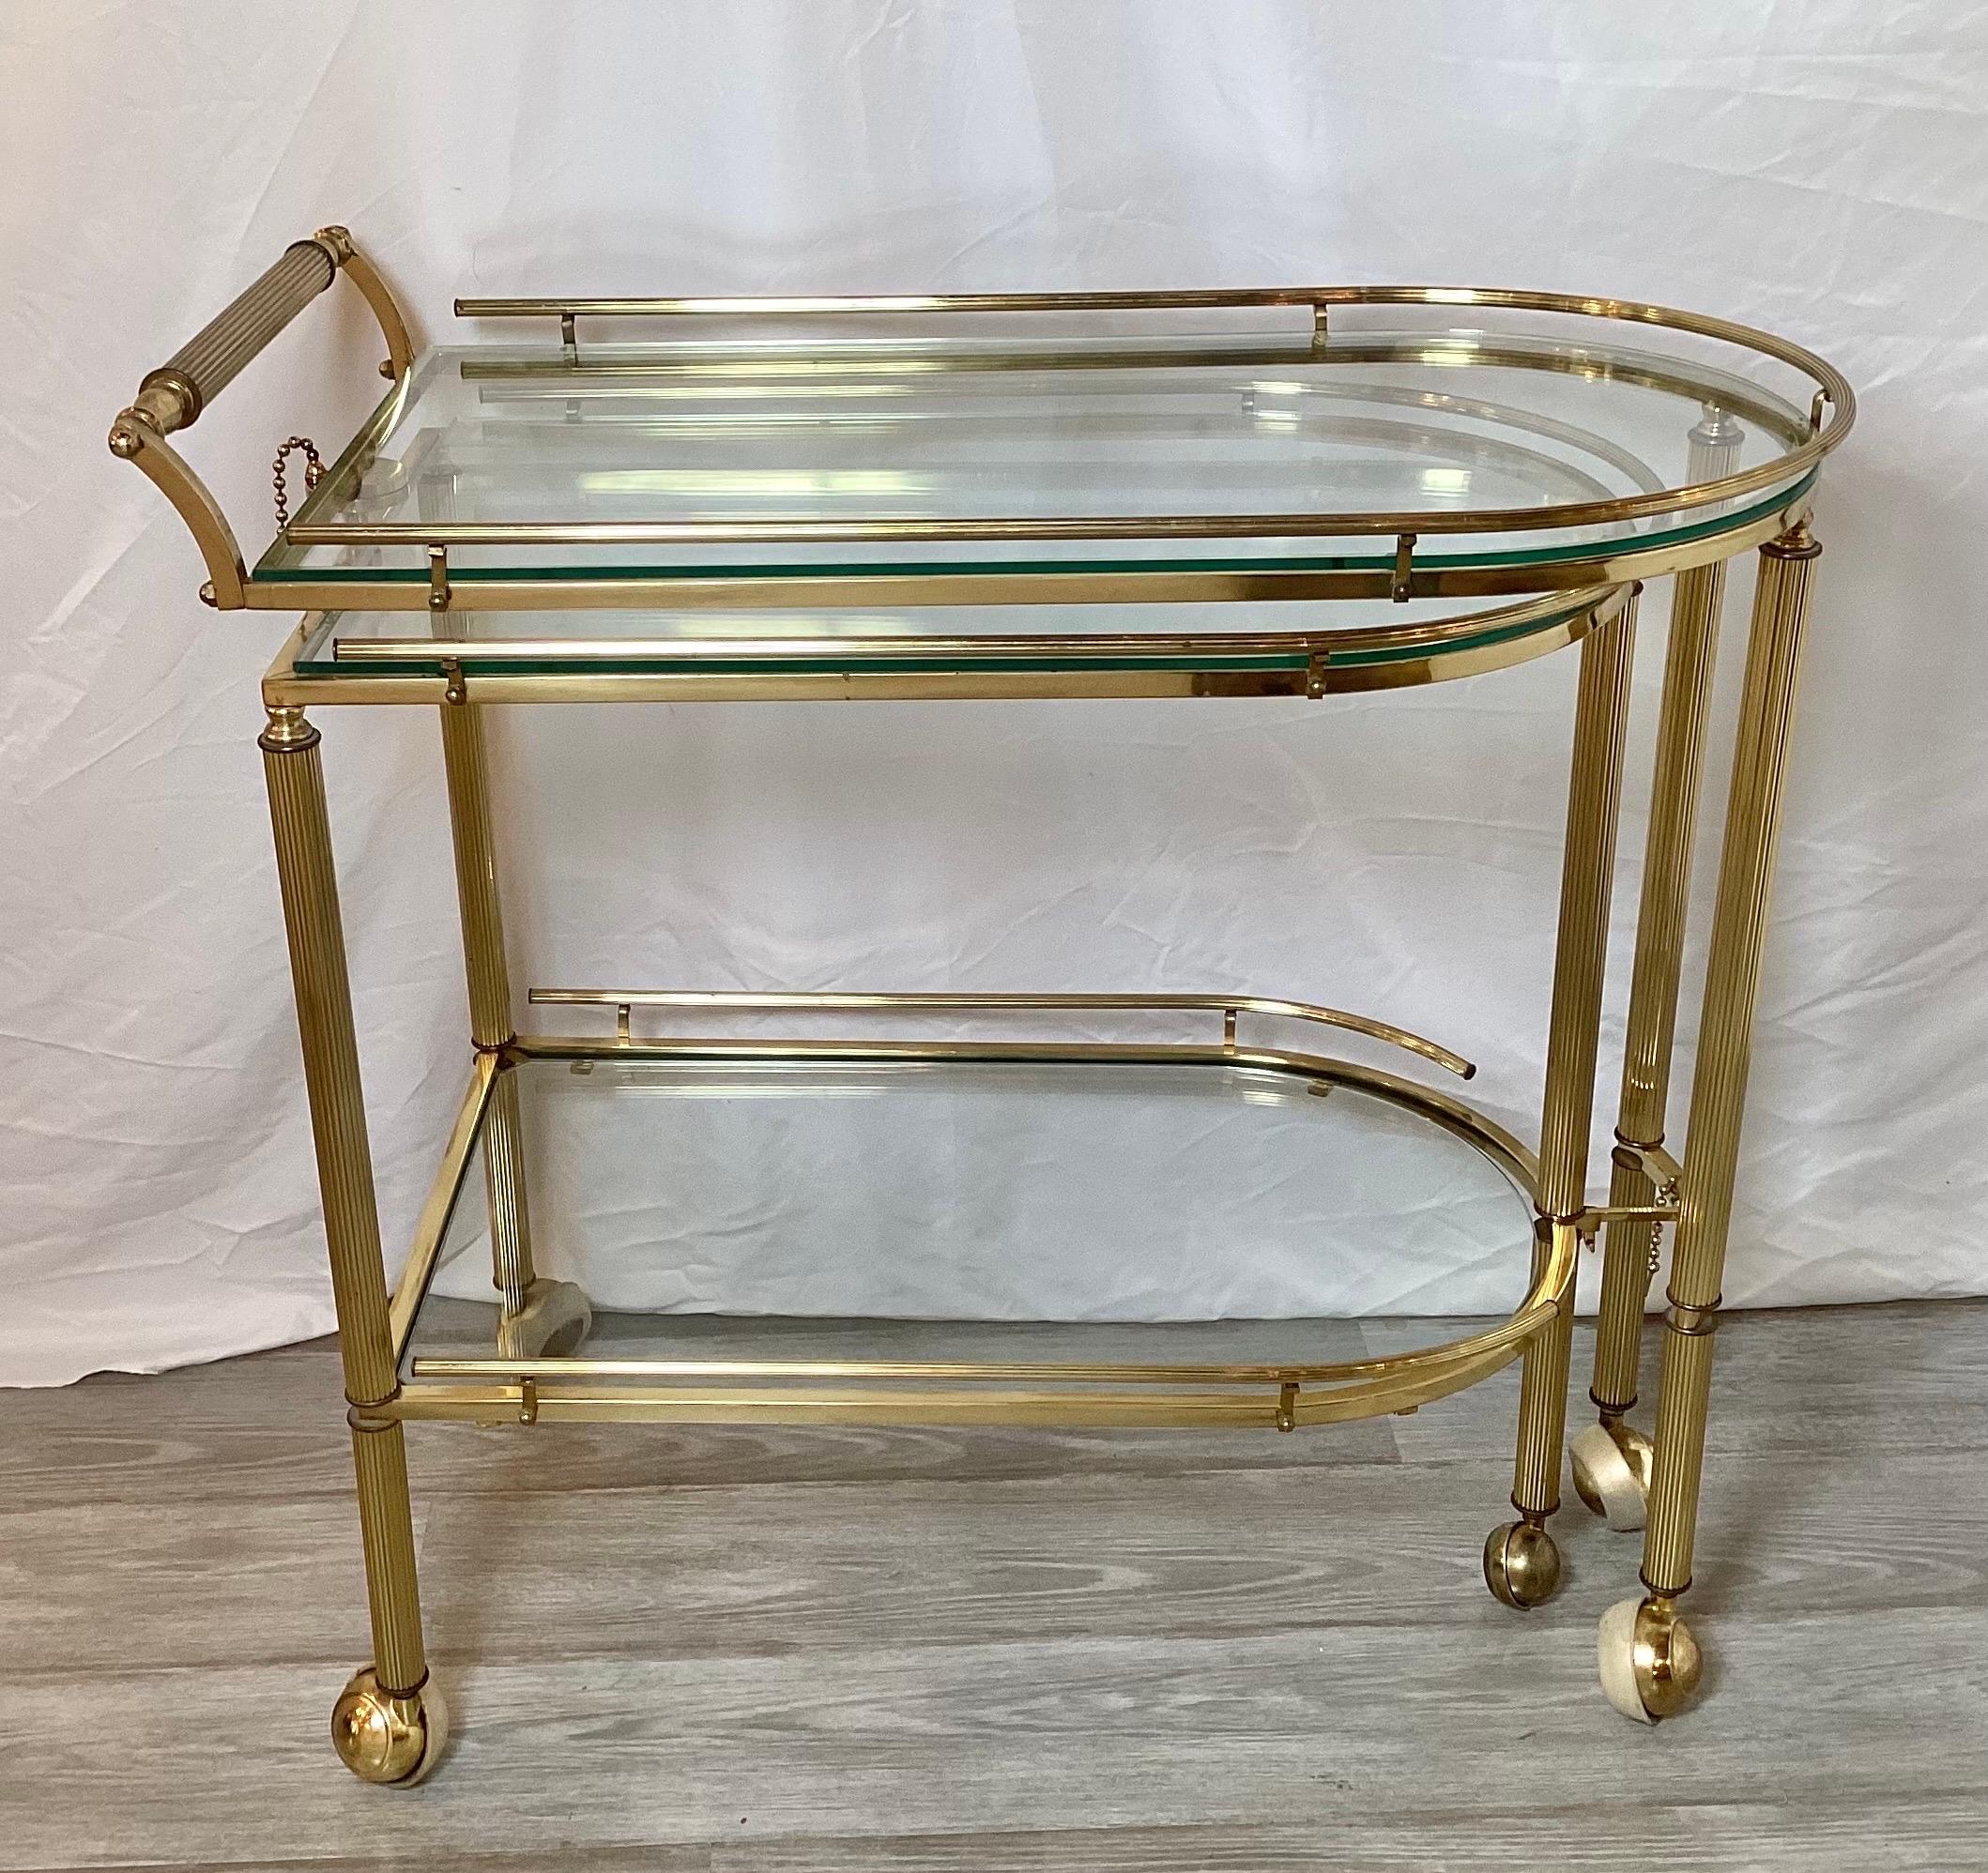 American Mid-Century Expandable Brass and Glass Bar/Serving Cart, Three Tiered Shelves